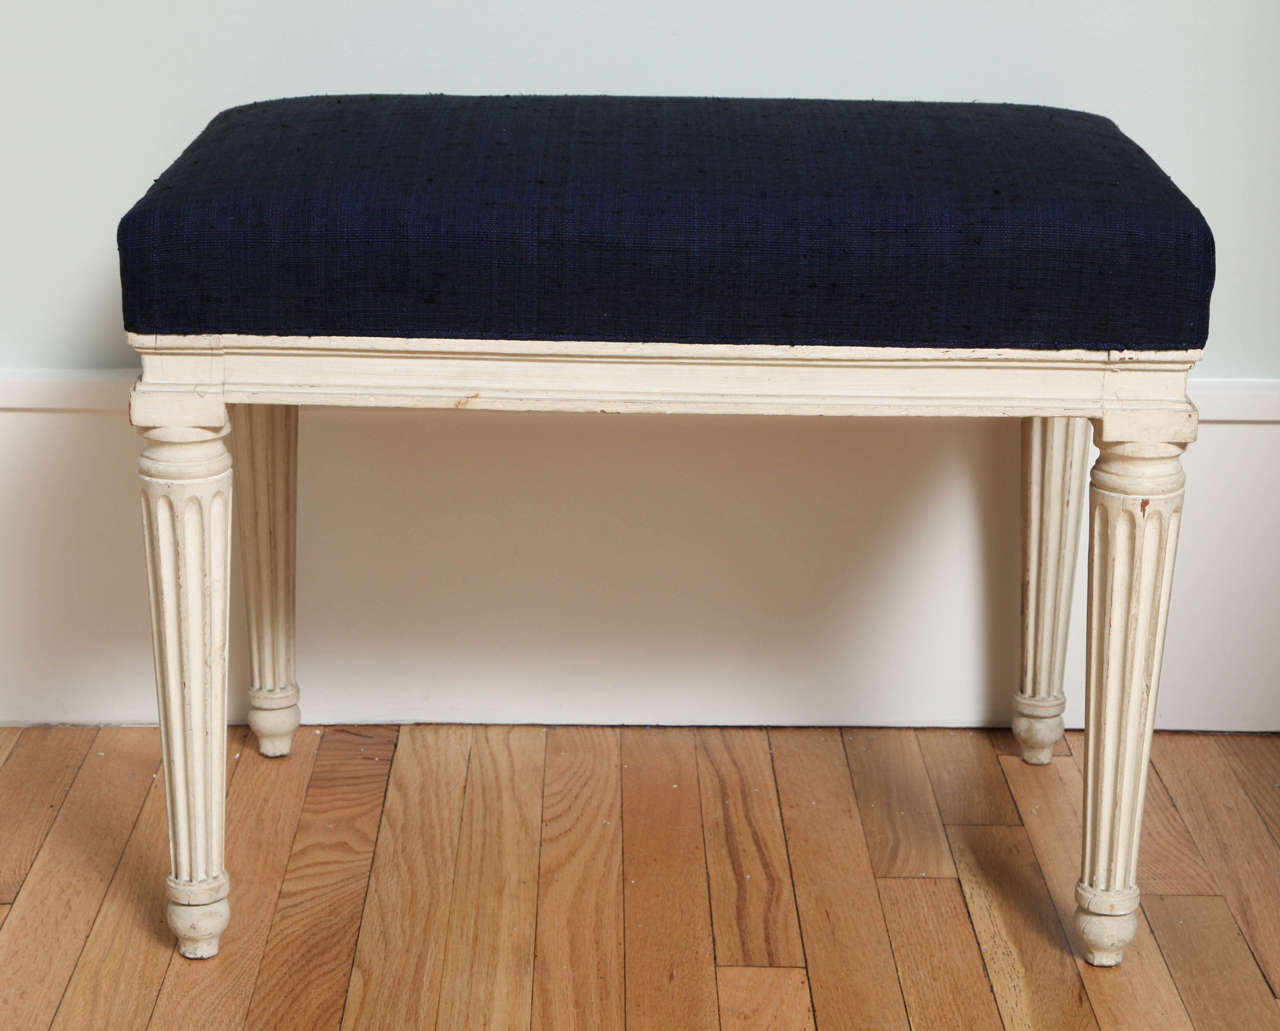 An 18th century French neoclassical stool from the collection of Mrs. Paul ("Bunny") Mellon, upholstered in the dark-blue, heavy cotton she selected for it.